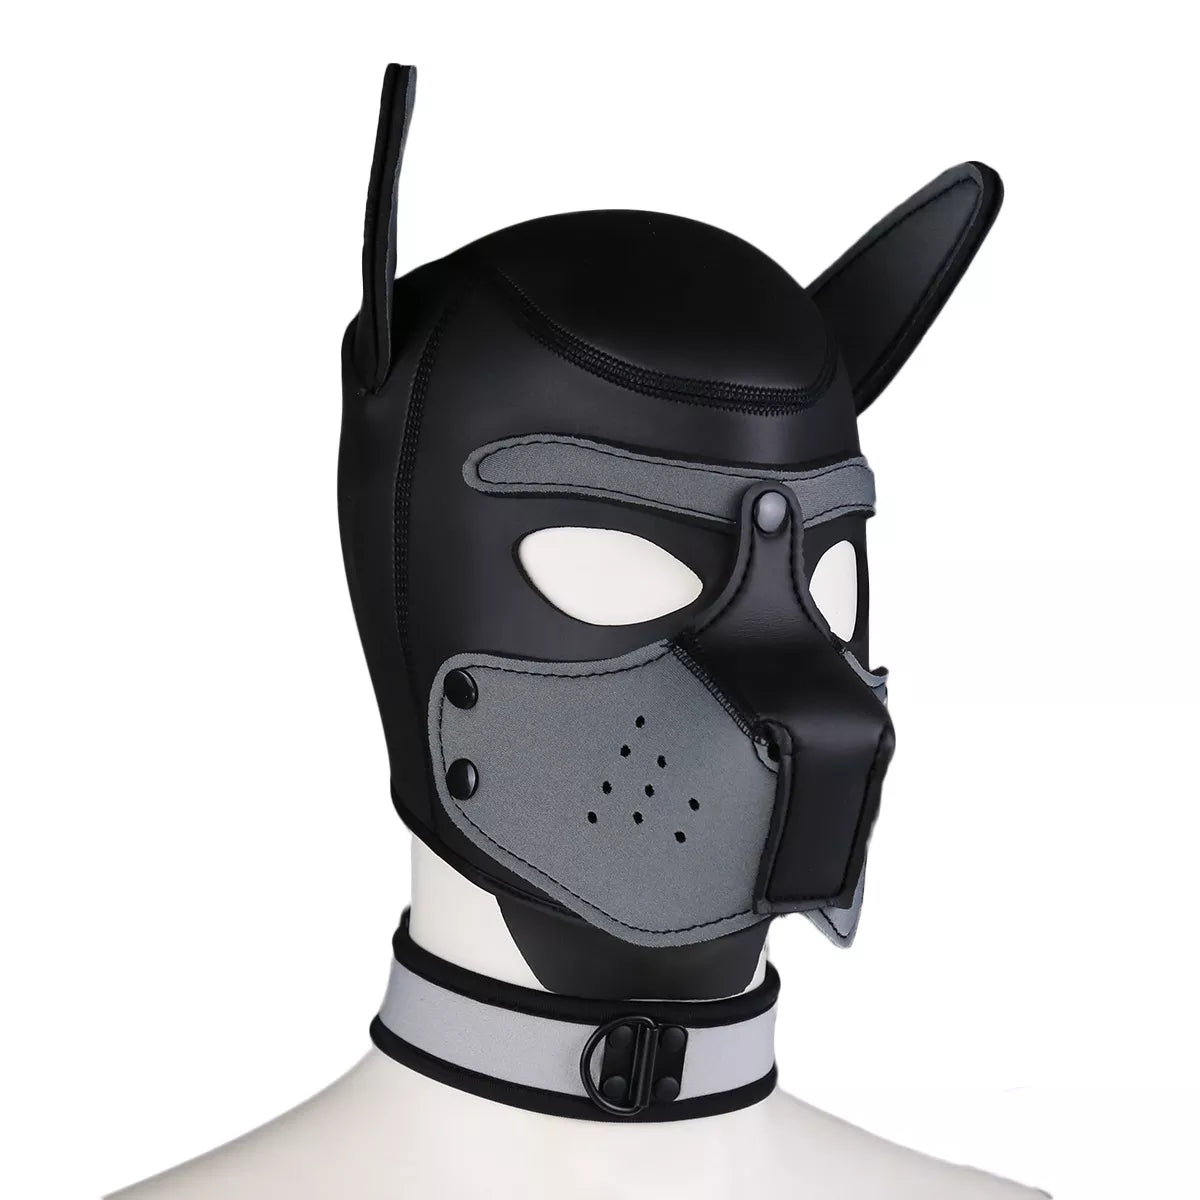 Puppy Cosplay Costumes of XL Code Brand New Increase Large Size Padded Rubber Full Head Hood Mask with Collar for Dog Roleplay